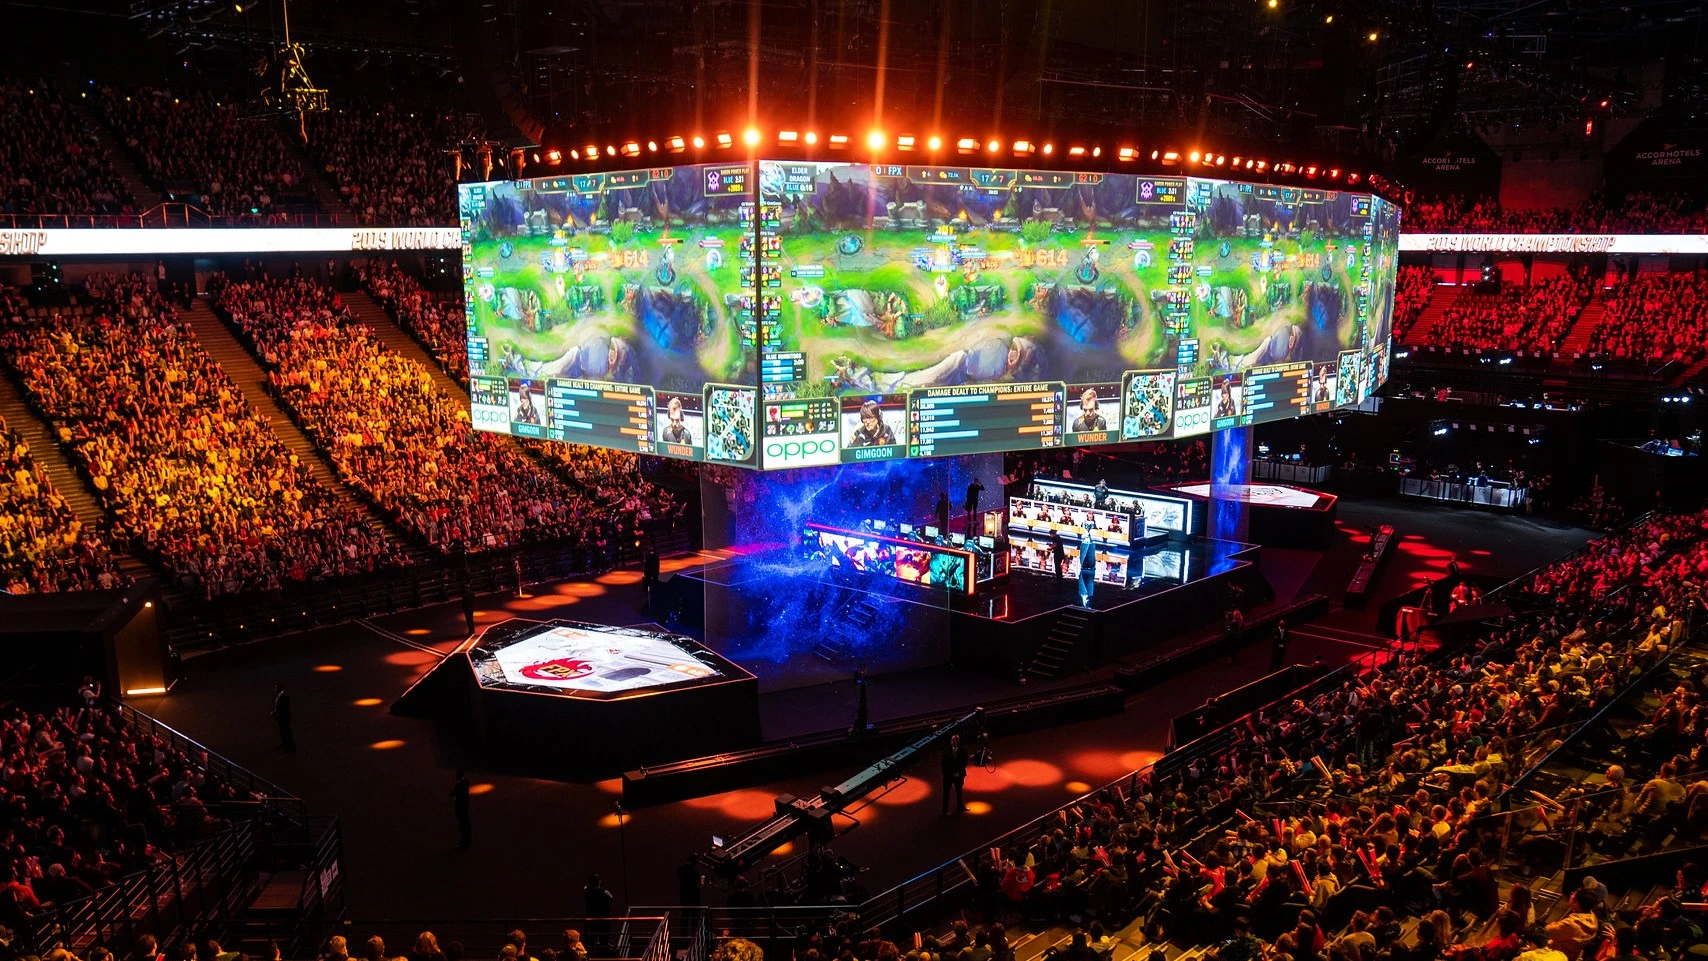 A stadium full to watch a competitive match of League of Legends.